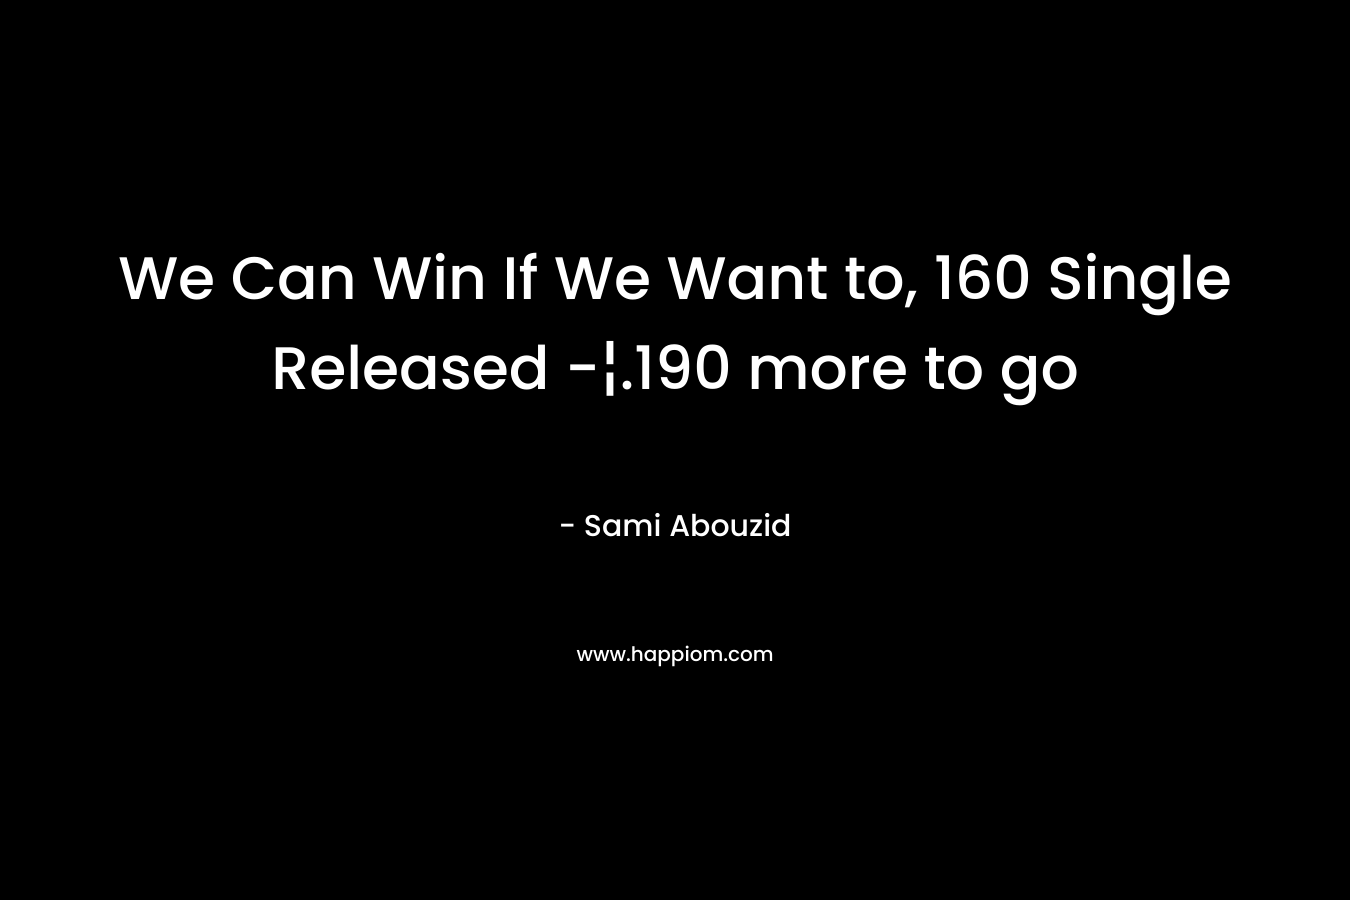 We Can Win If We Want to, 160 Single Released -¦.190 more to go